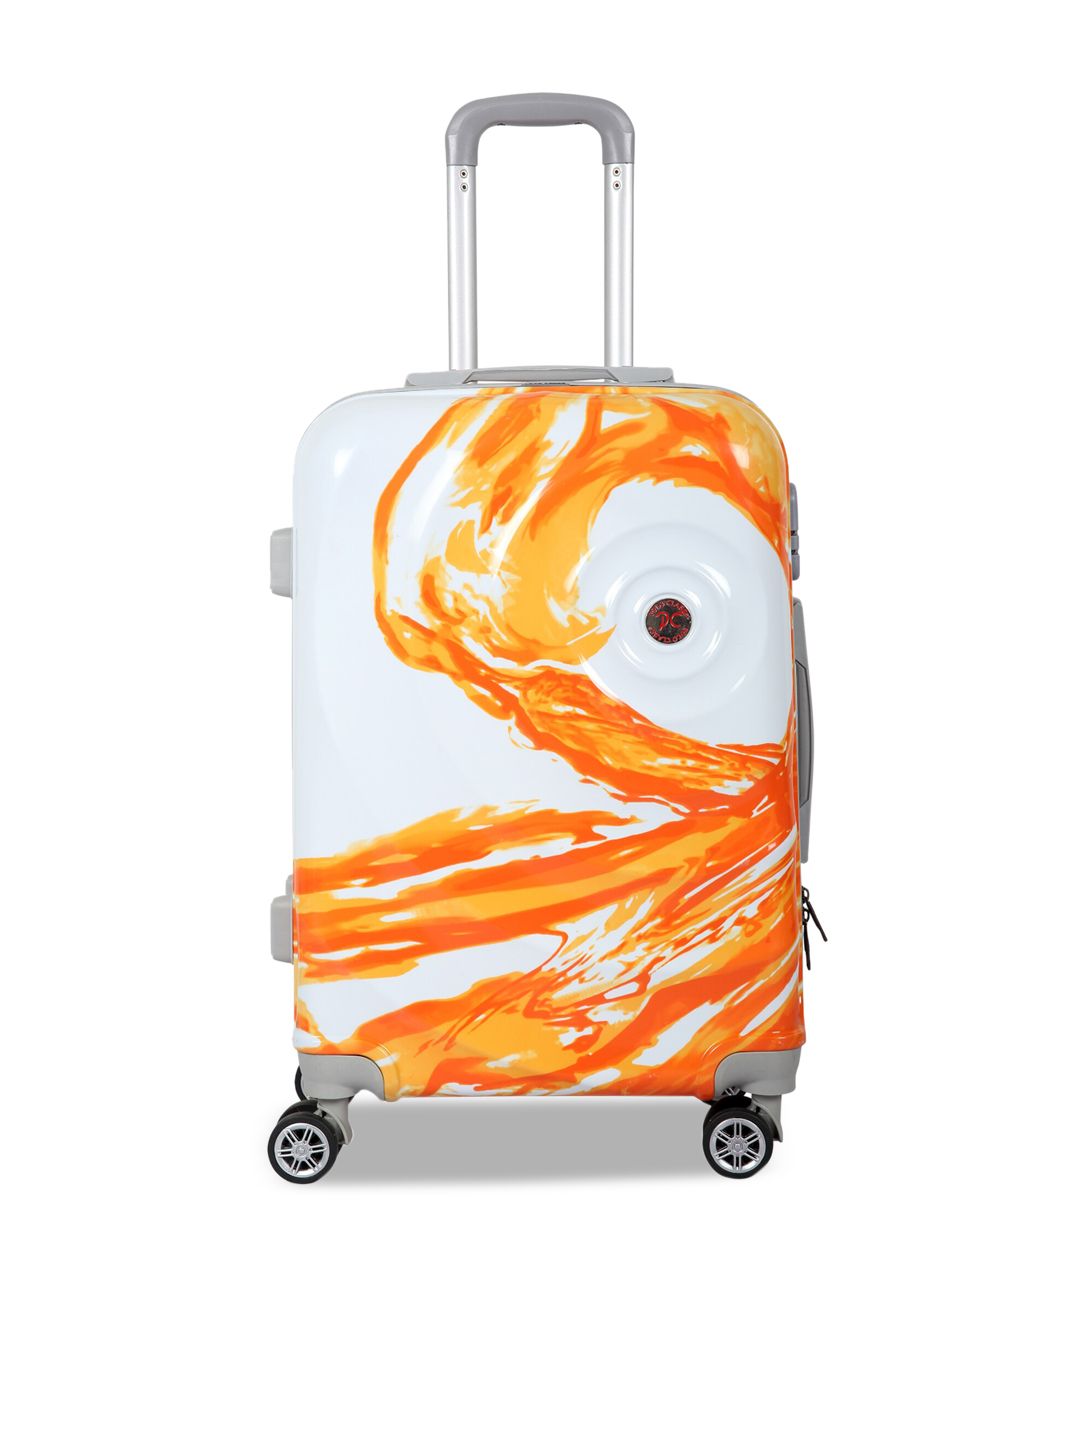 Polo Class Unisex Orange Printed Hard-Sided Cabin Trolley Suitcase Price in India